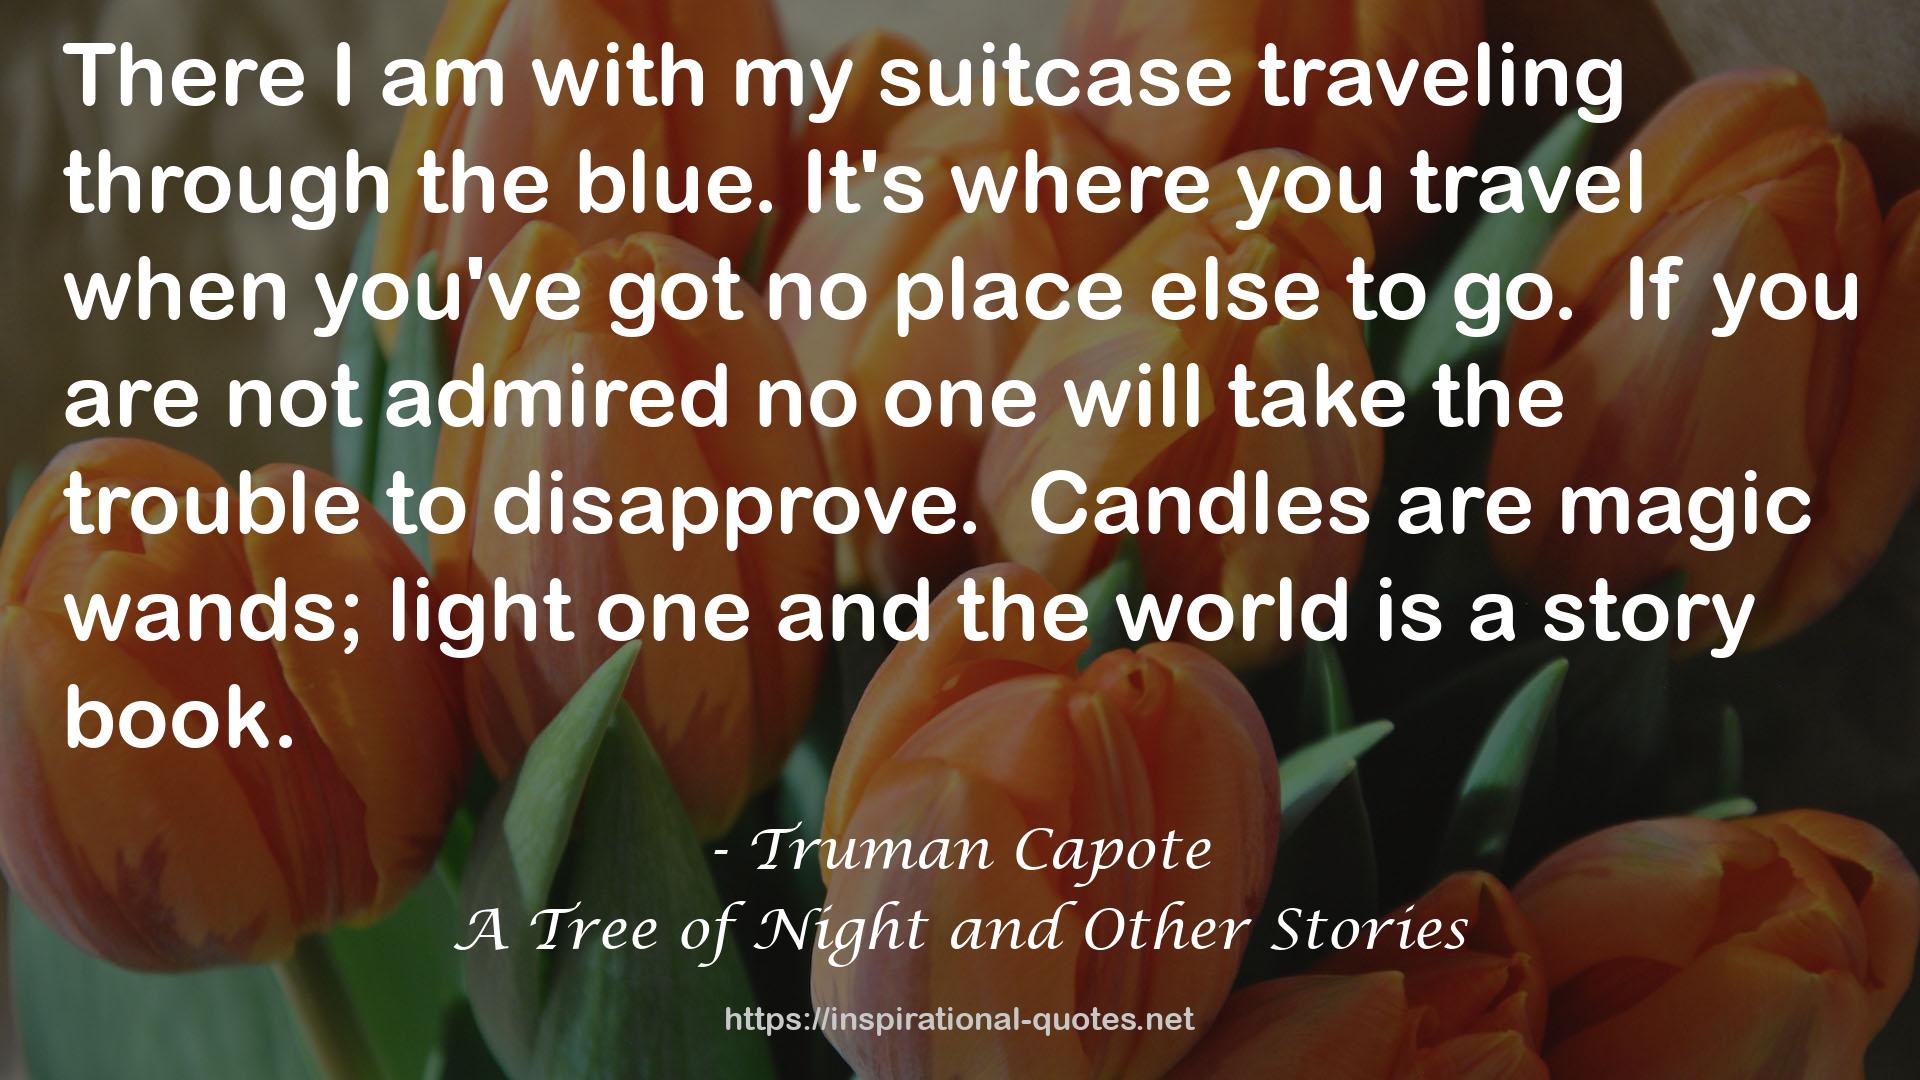 A Tree of Night and Other Stories QUOTES